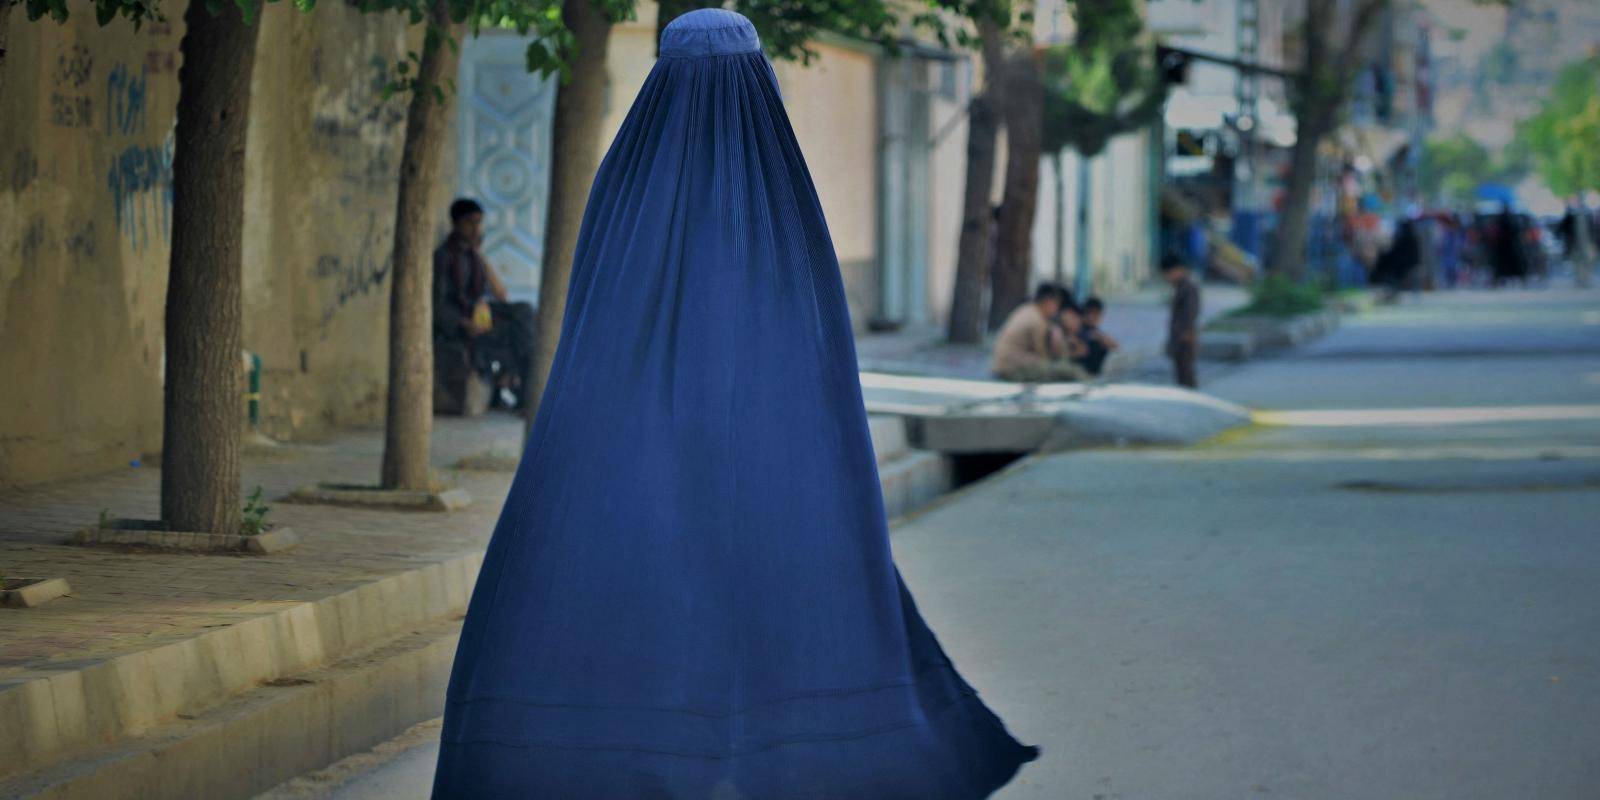 https://www.chathamhouse.org/sites/default/files/styles/12_6_media_huge/public/2022-06/2022-06-08-afghanistan-womens-rights-burqa.jpg?h=3d044768&itok=o-ZWo3dr